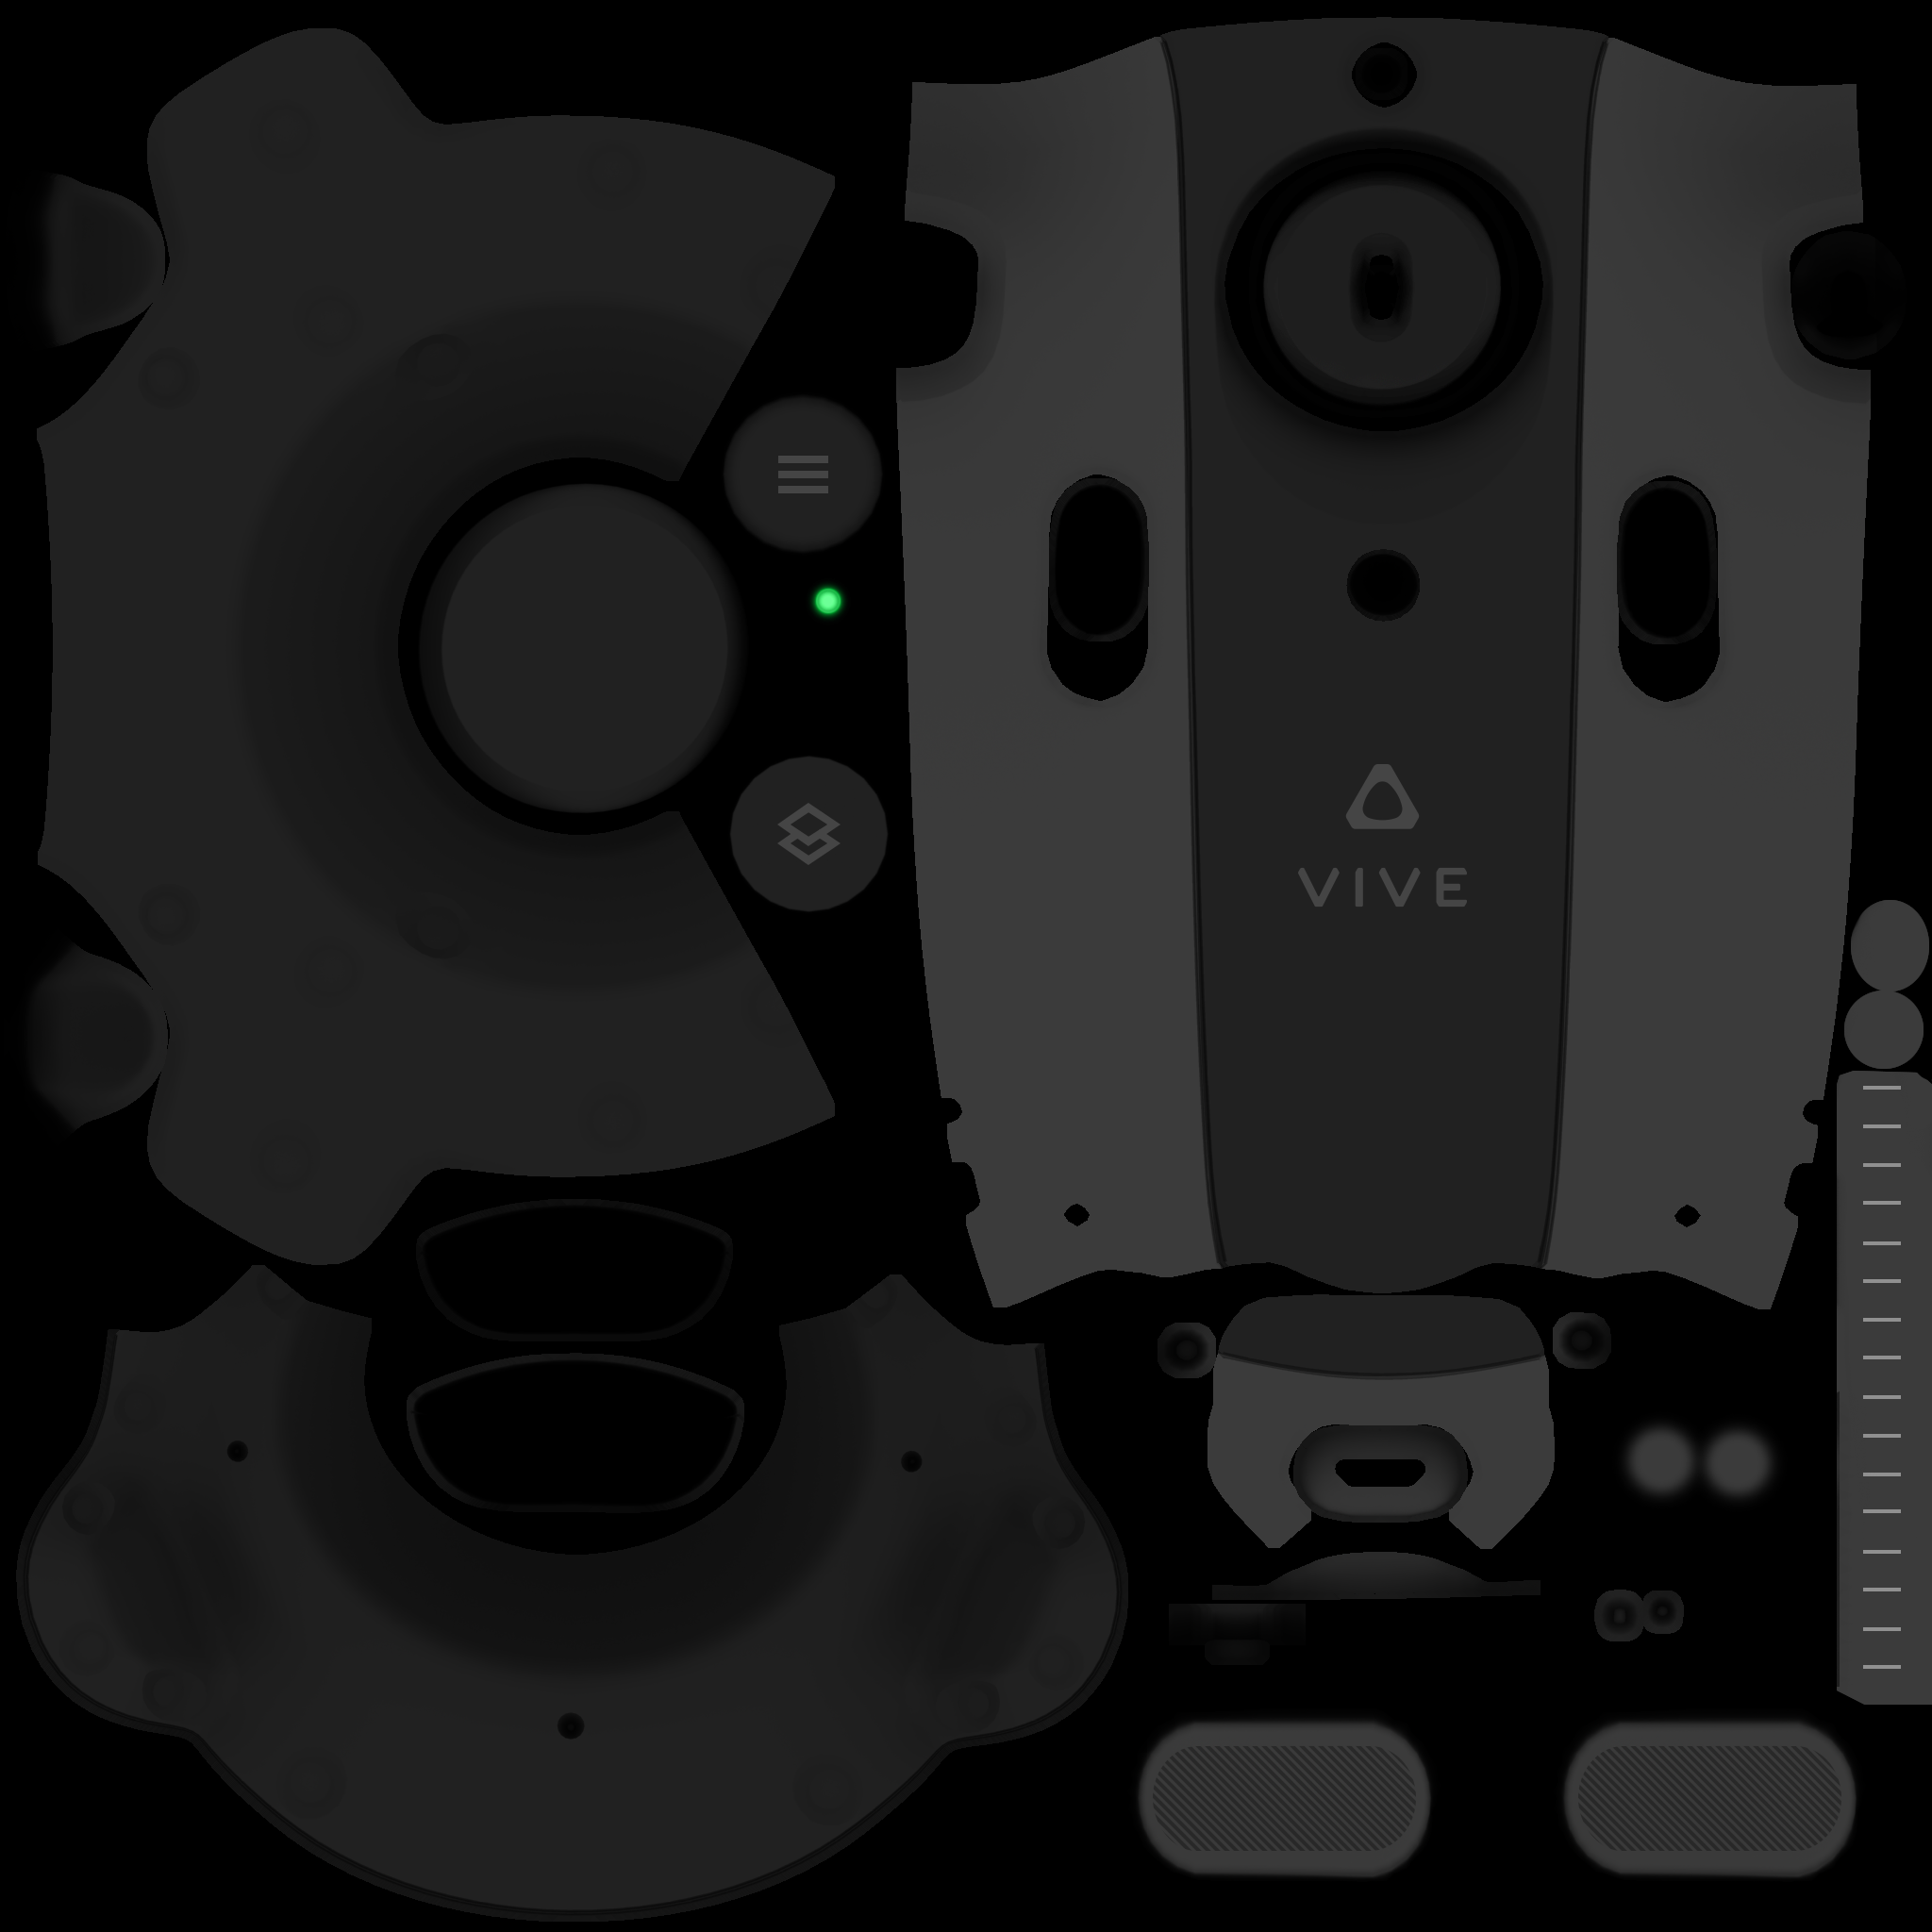 examples/models/obj/vive-controller/onepointfive_texture.png